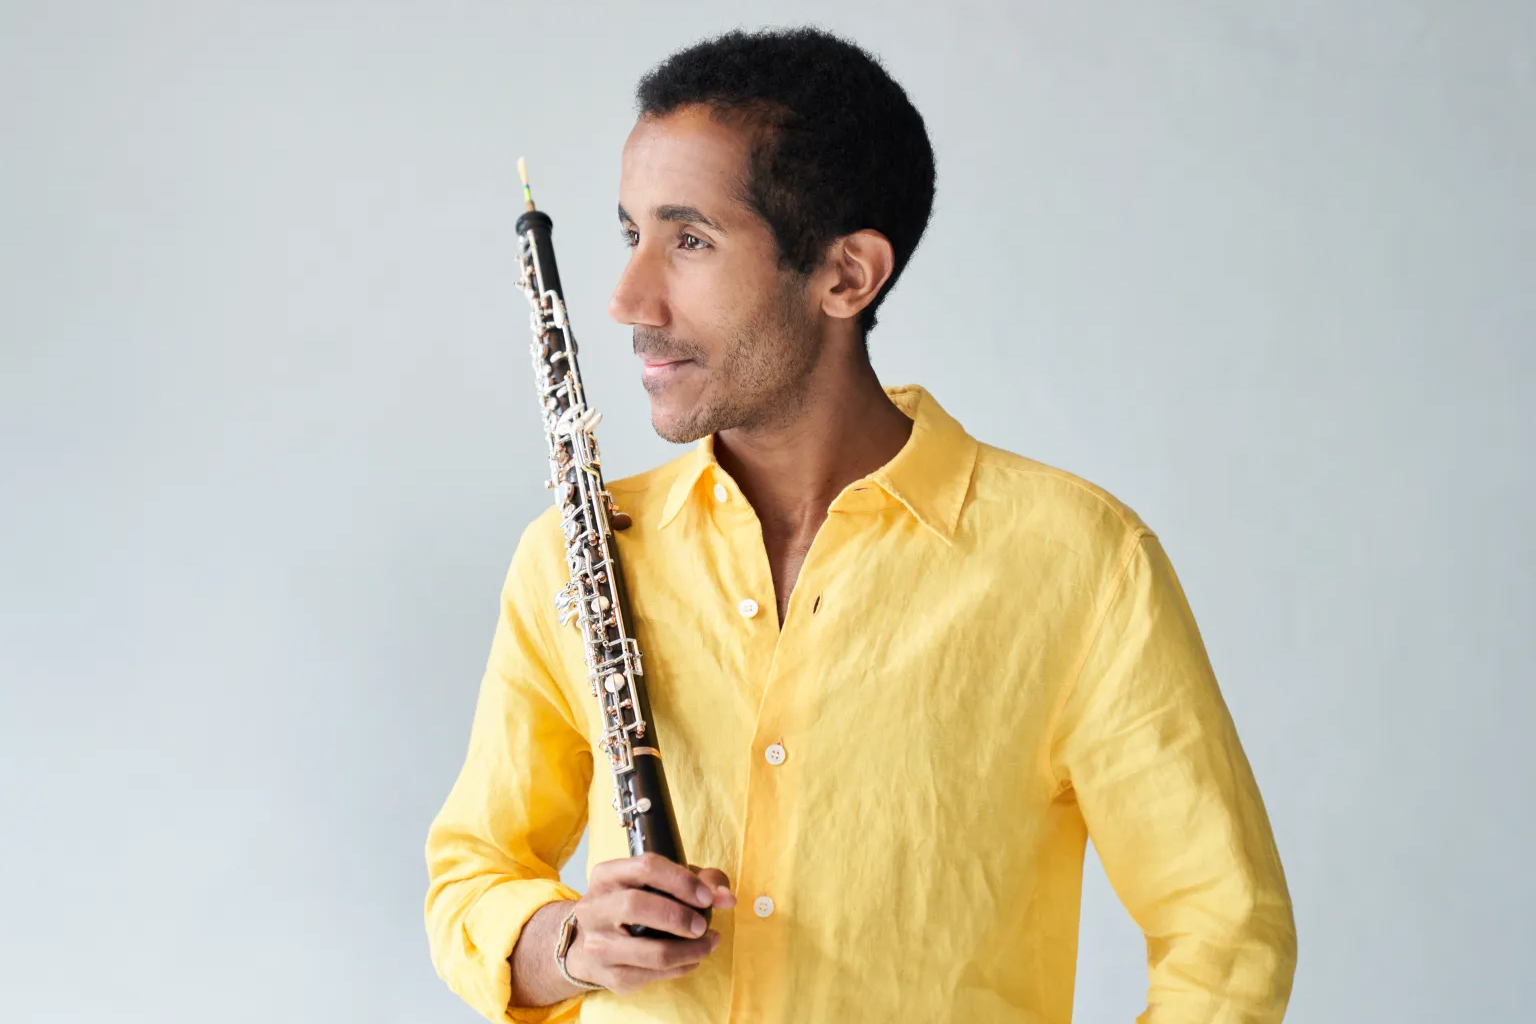 A man in a yellow shirt holds an oboe and looks off to the side